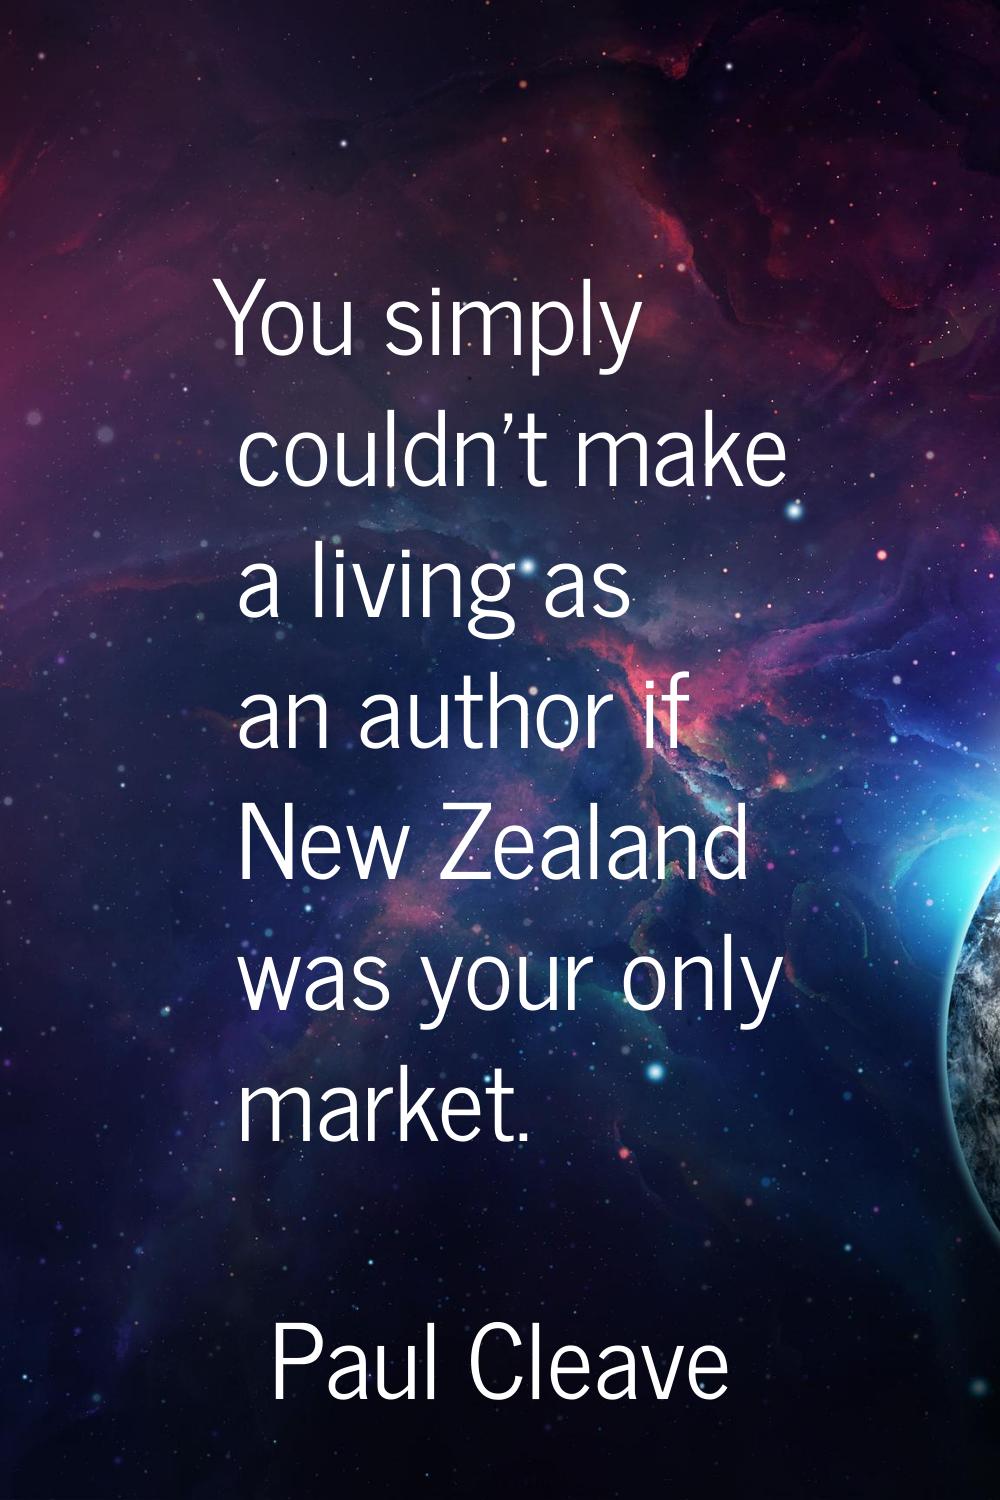 You simply couldn't make a living as an author if New Zealand was your only market.